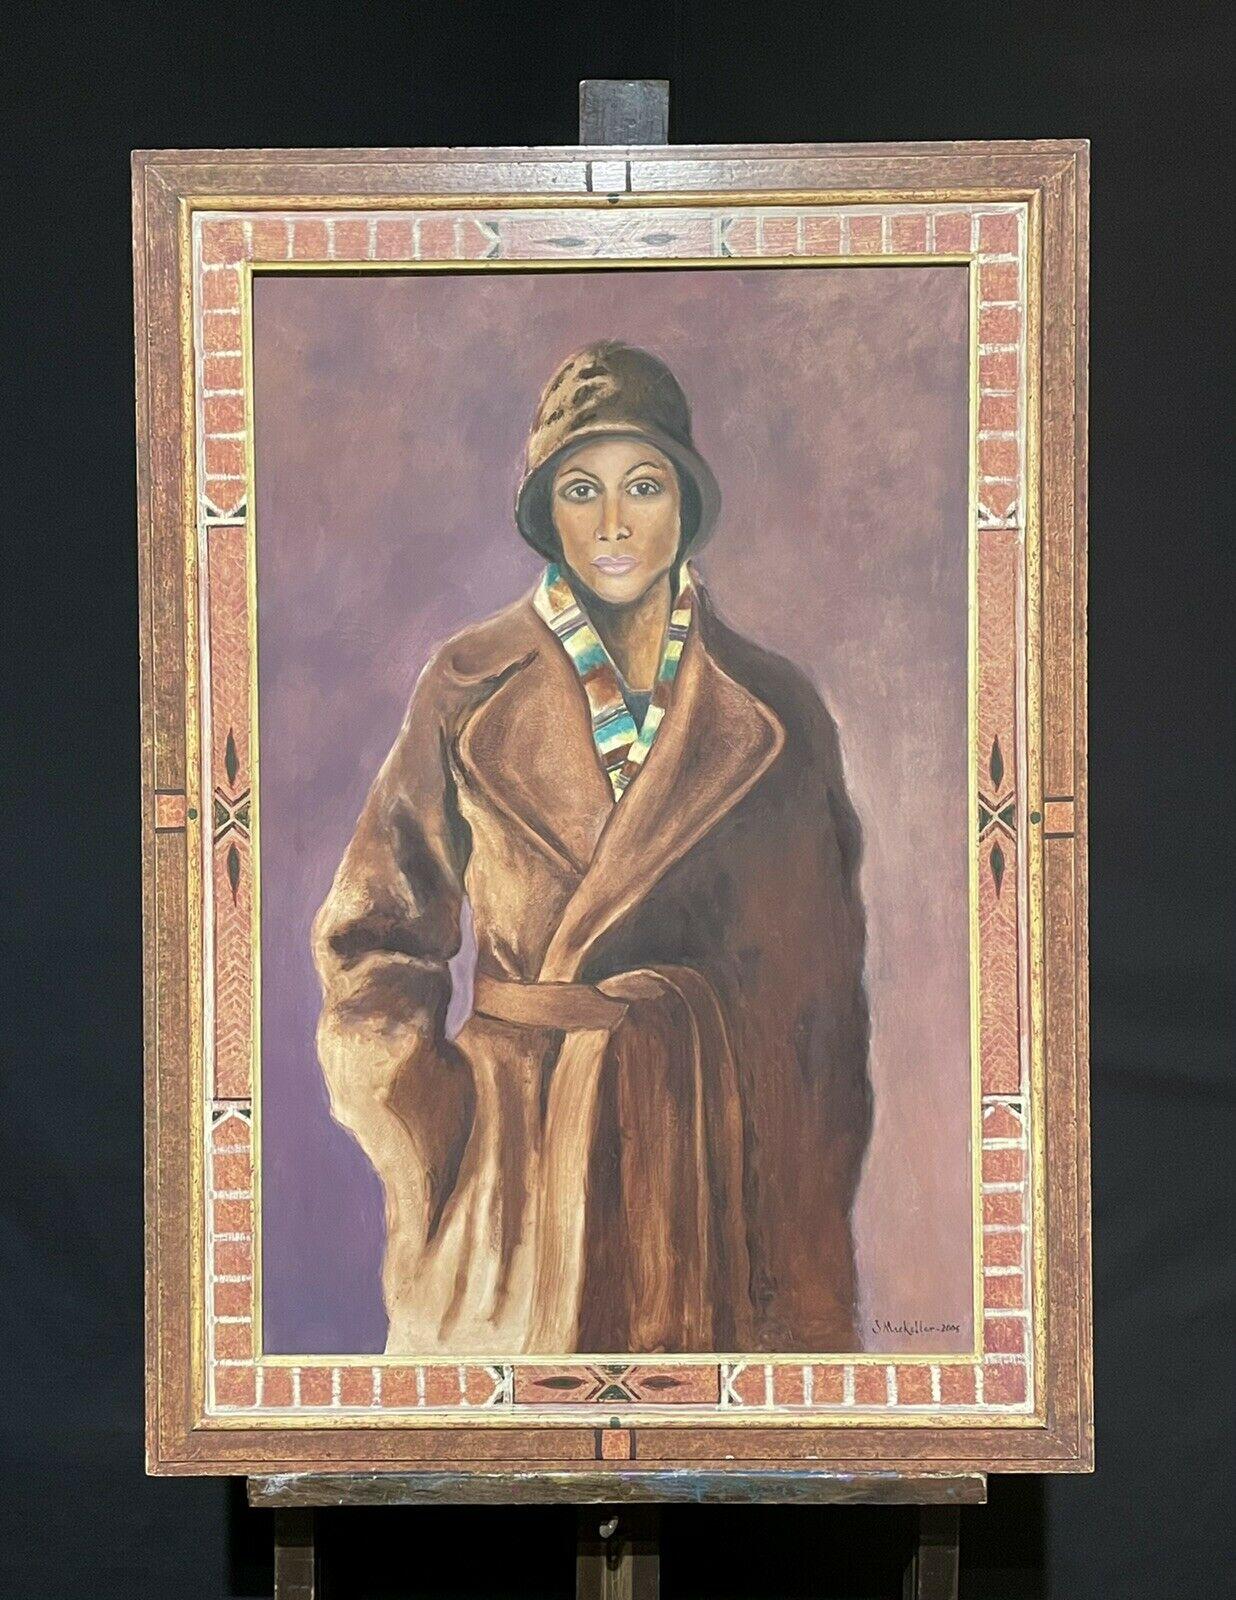 VERY LARGE SIGNED OIL PORTRAIT OF LADY IN VINTAGE COAT & HAT - DATED - FRAMED - Modern Painting by J. Mackeller 